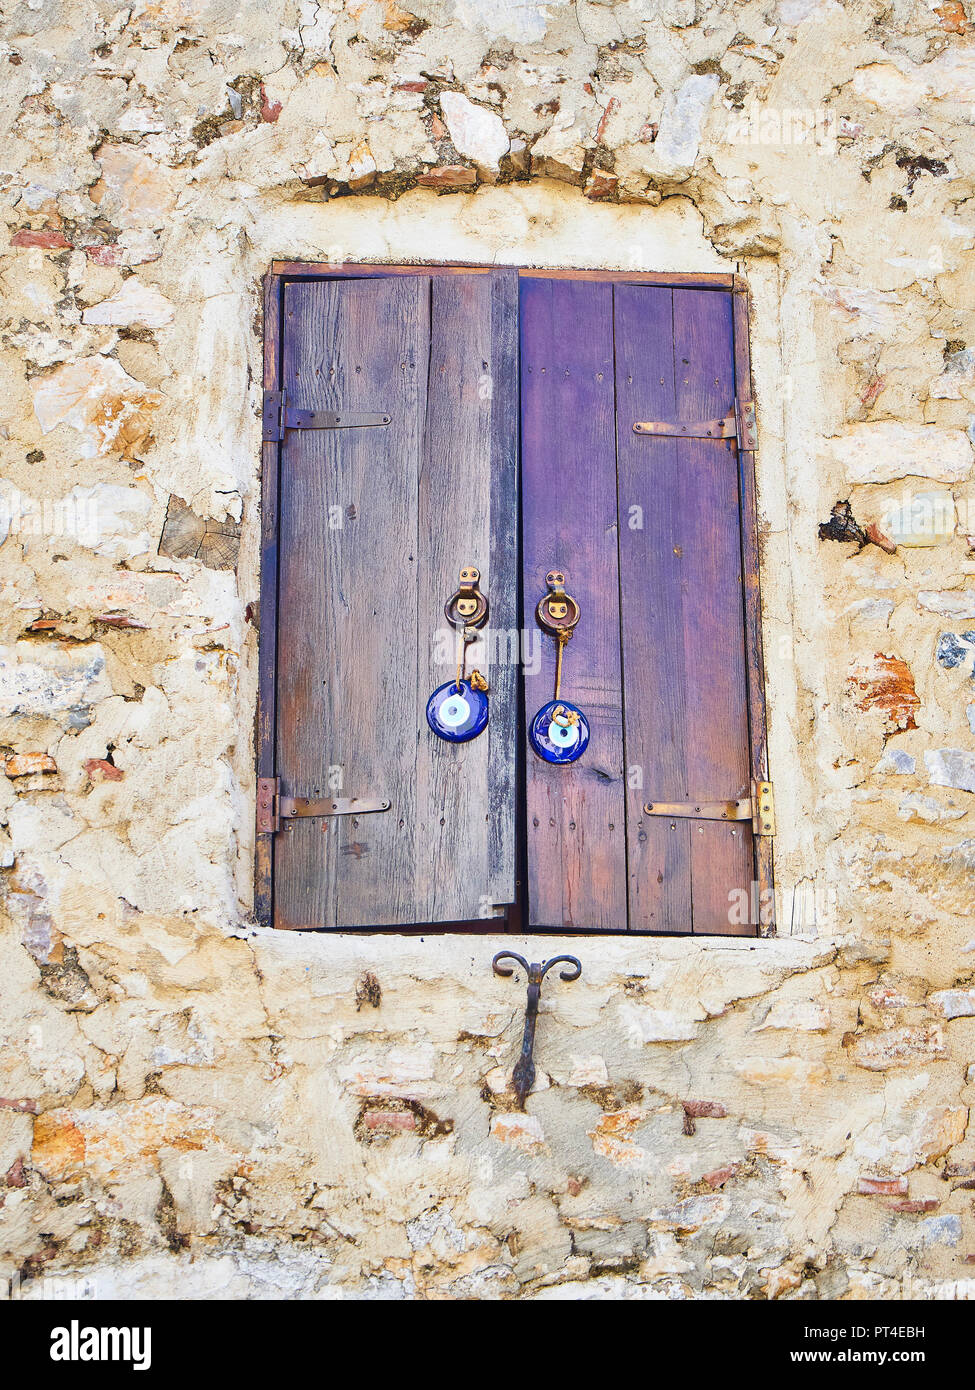 Antique wooden window on a stone wall with a Nazar boncugu, a Turkish eye-shaped amulet. Stock Photo